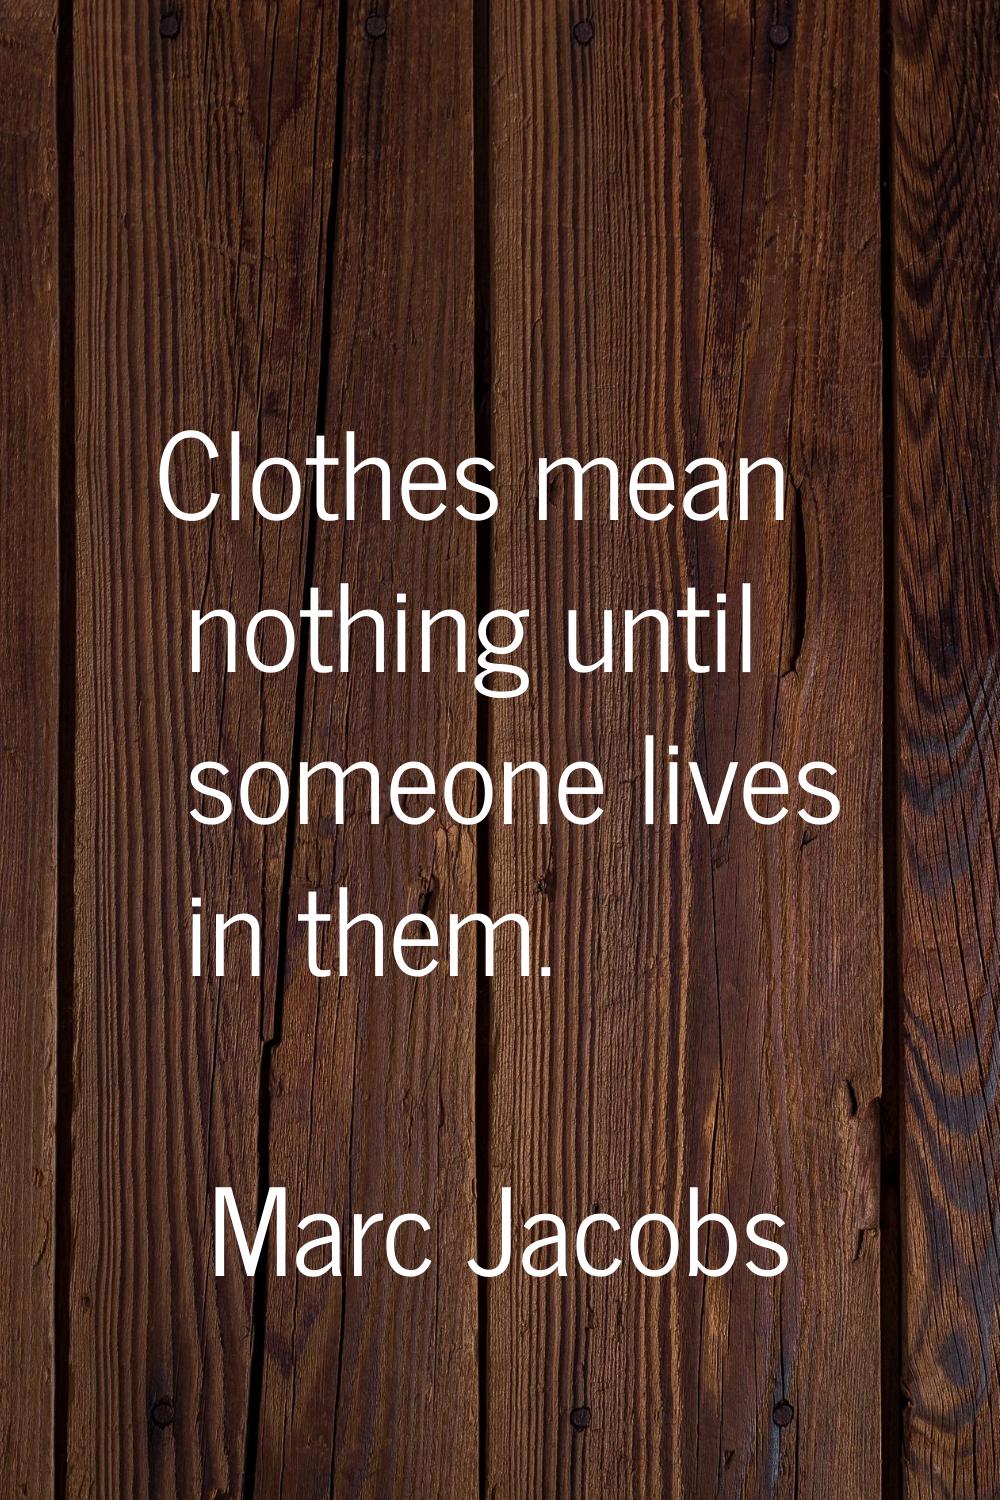 Clothes mean nothing until someone lives in them.